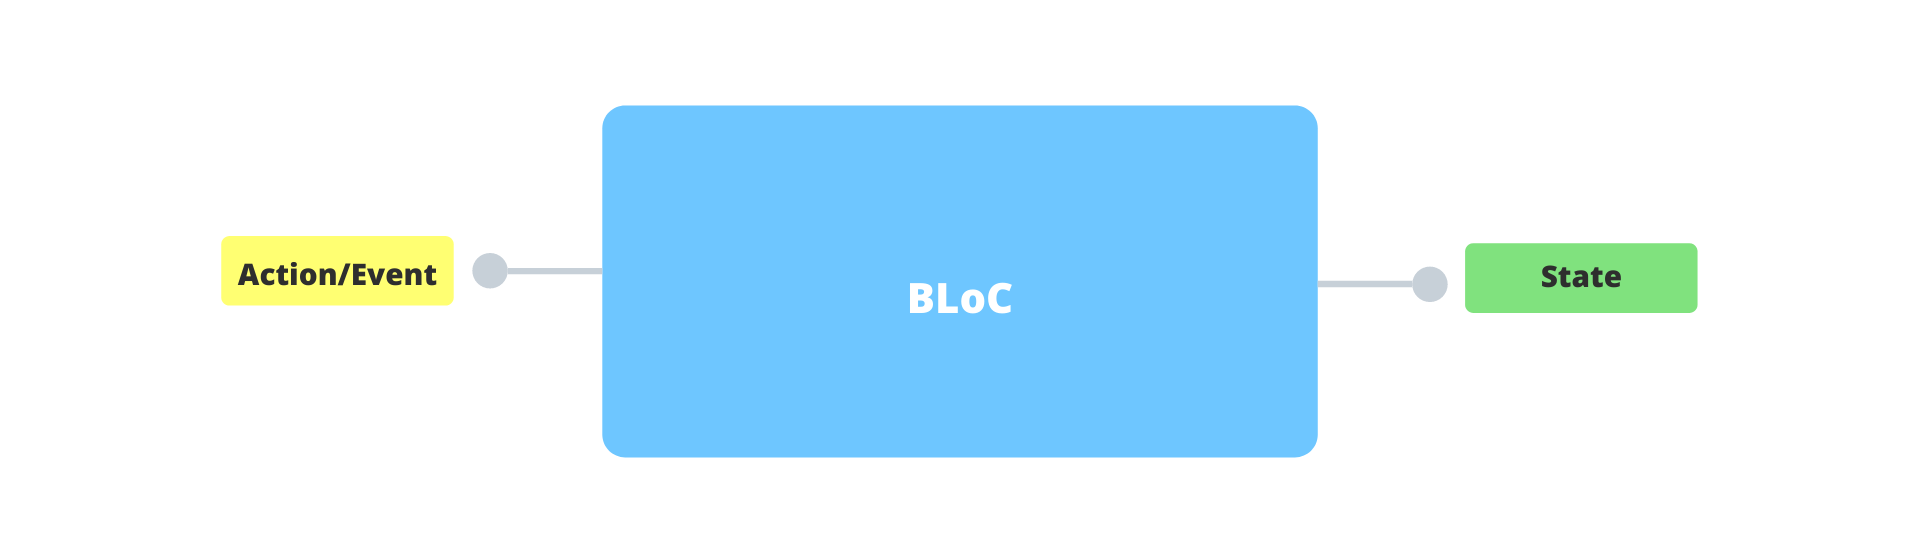 bloc-one-input-one-output